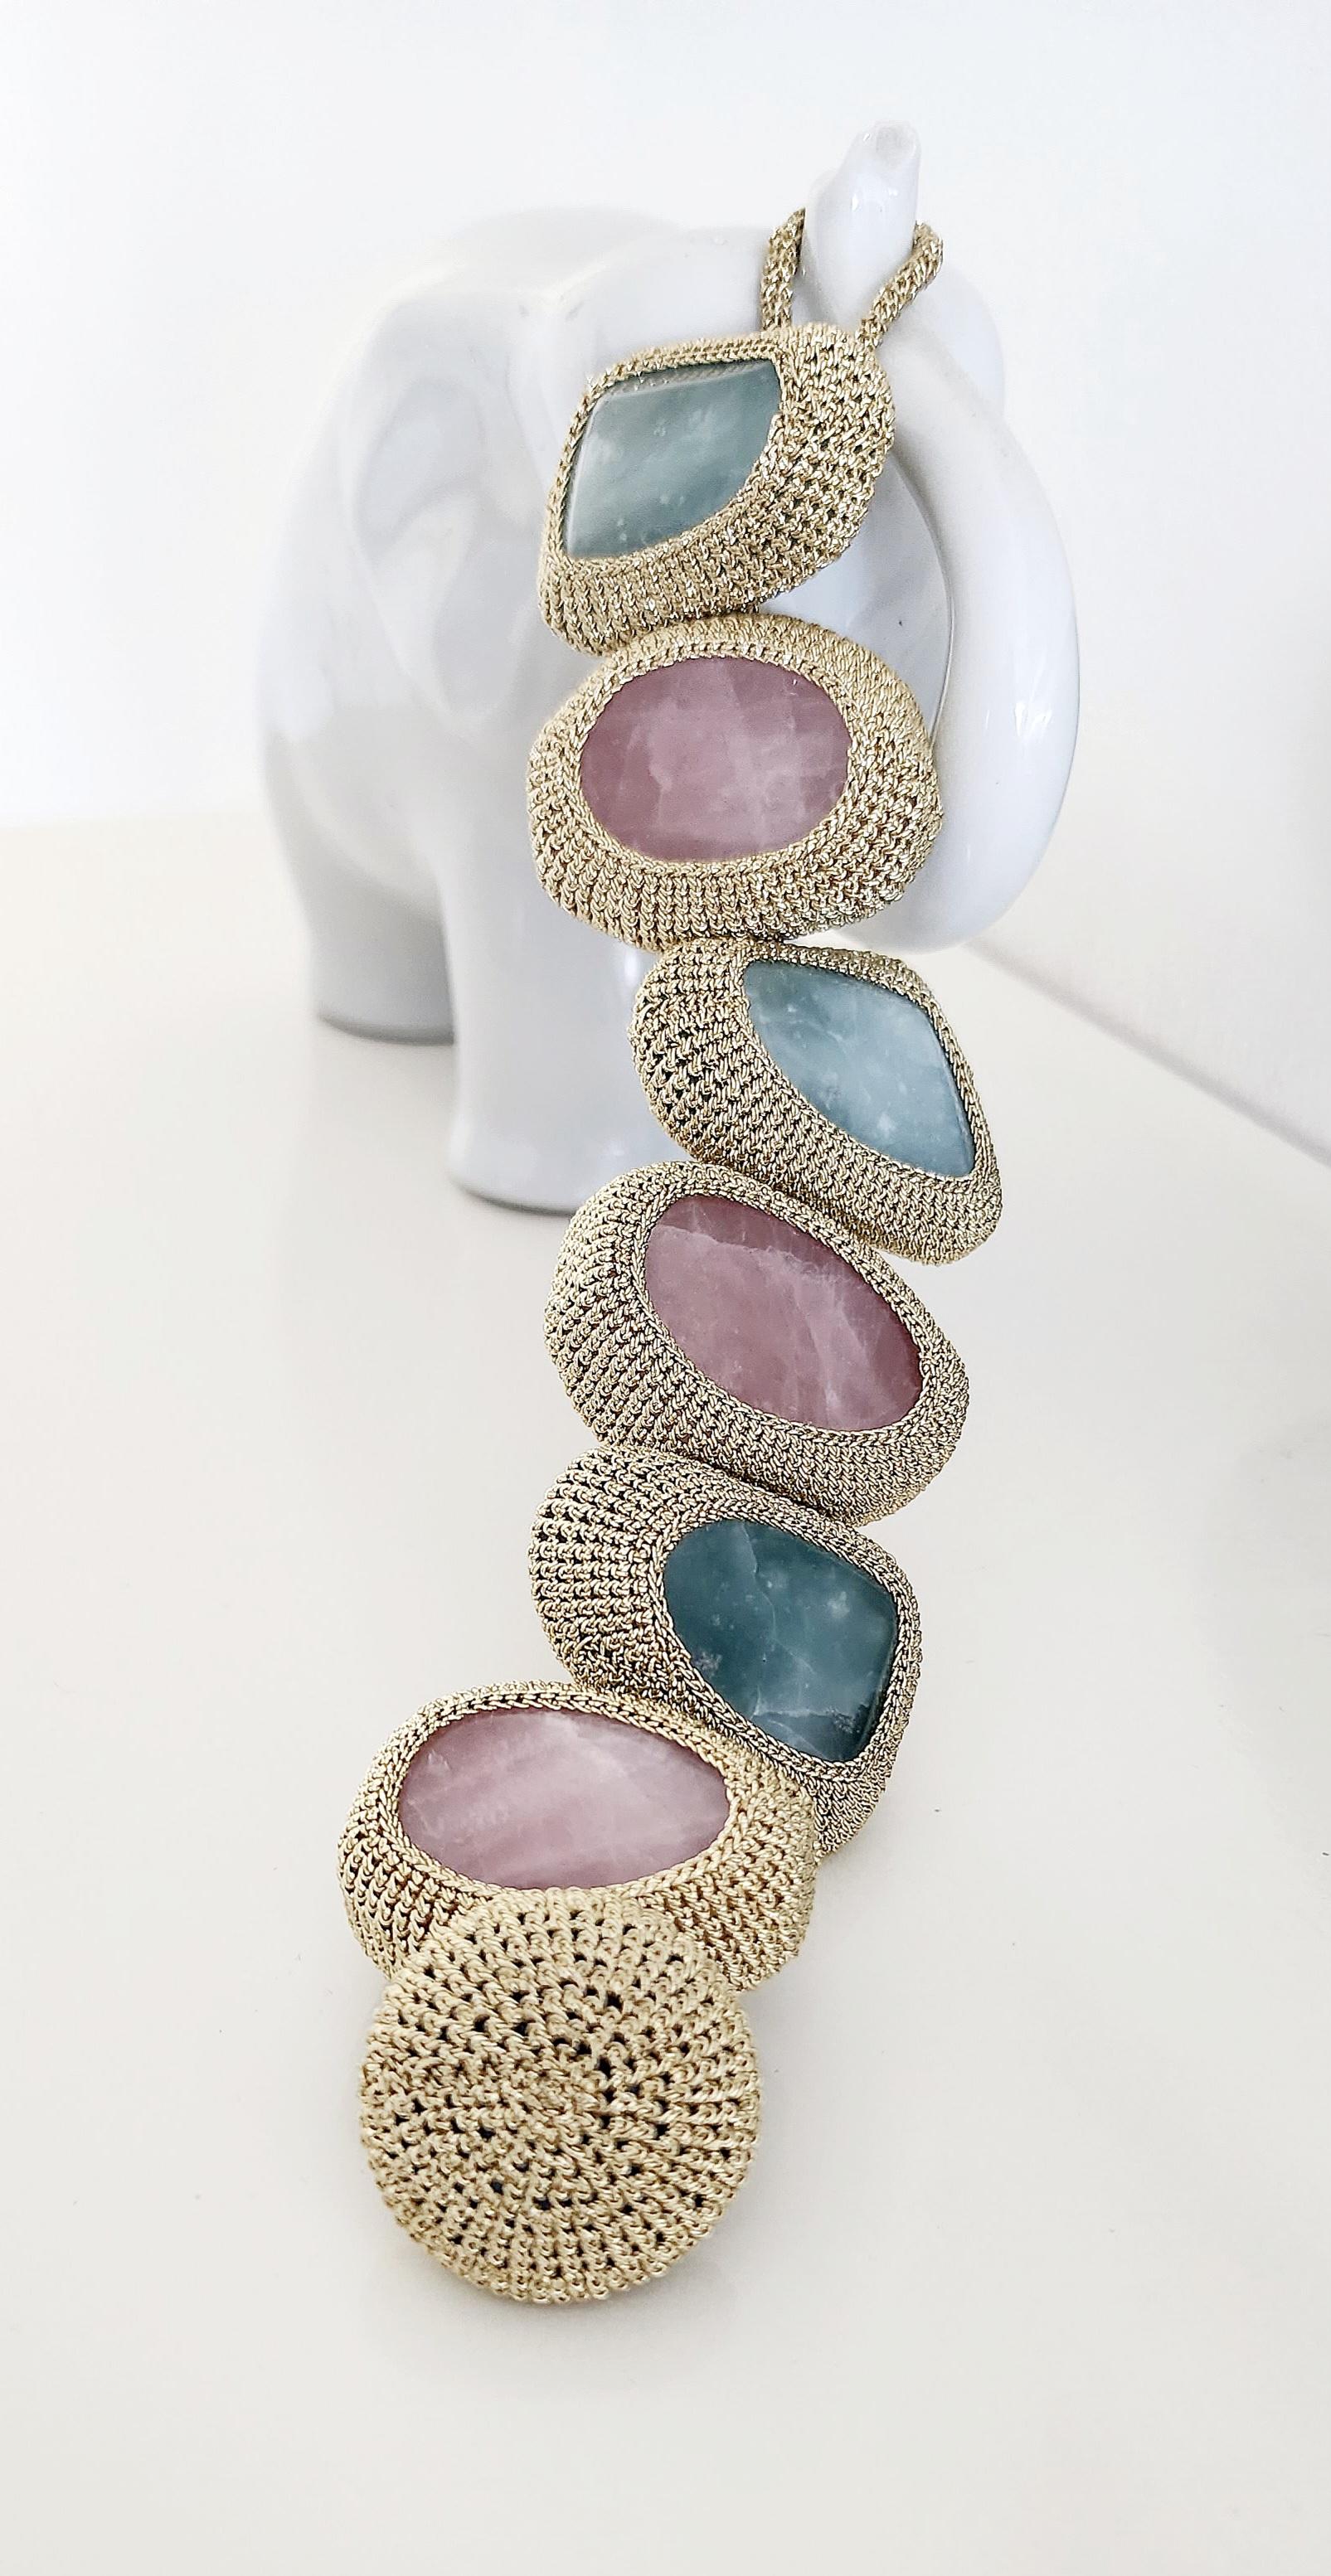 This is a wonderful statement bracelet. It evokes the feeling of spring with its pastel colored stones. The thread is a smooth passing light golden thread with no metal content. The stones are beautiful large polished Amazonites and Rose Quartz.